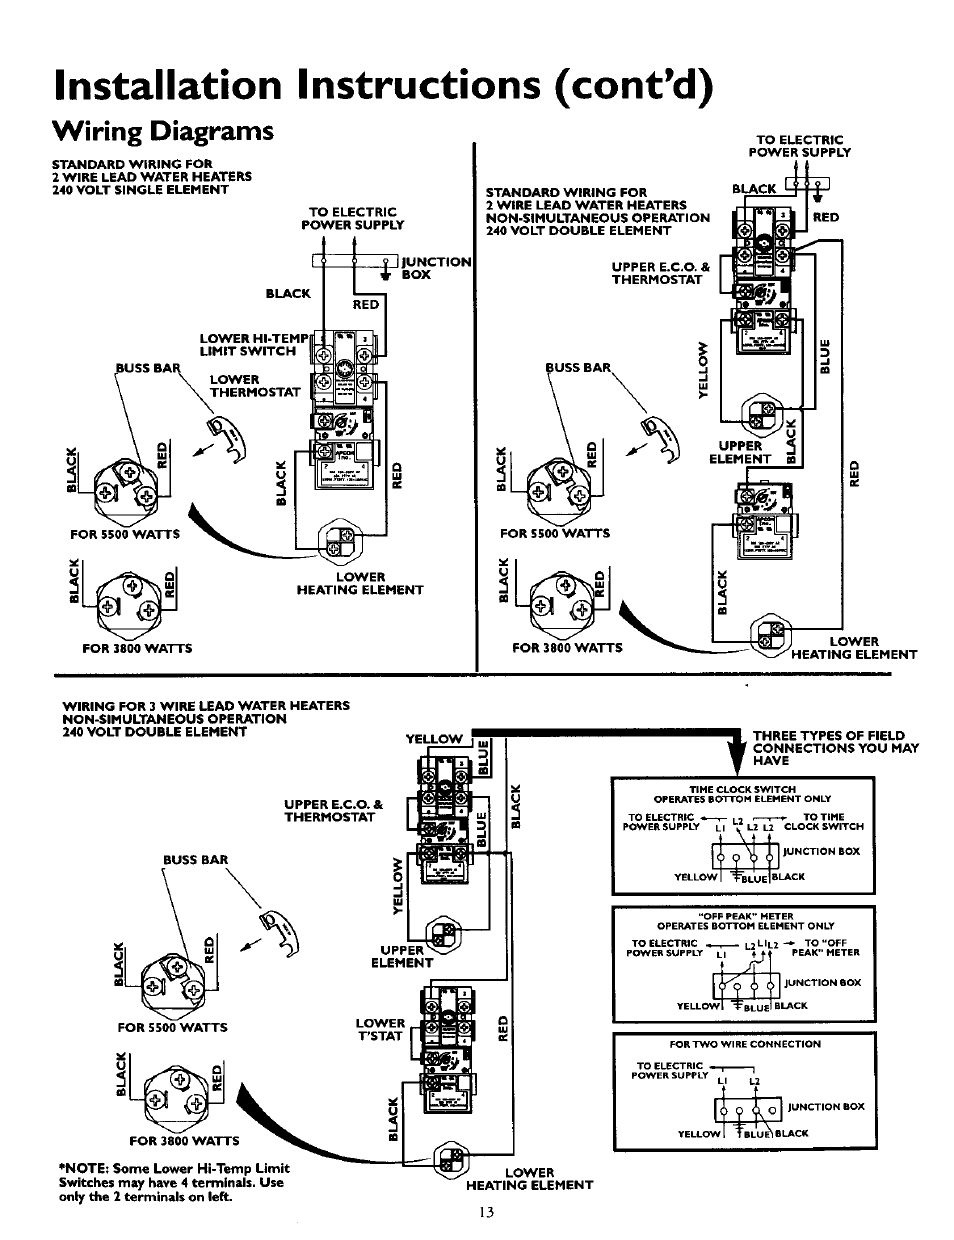 Installation instructions (cont'd), Wiring diagrams | Kenmore POWER MISER  153.327164 User Manual | Page 13 / 28 12 Water Heater Element Manuals Directory